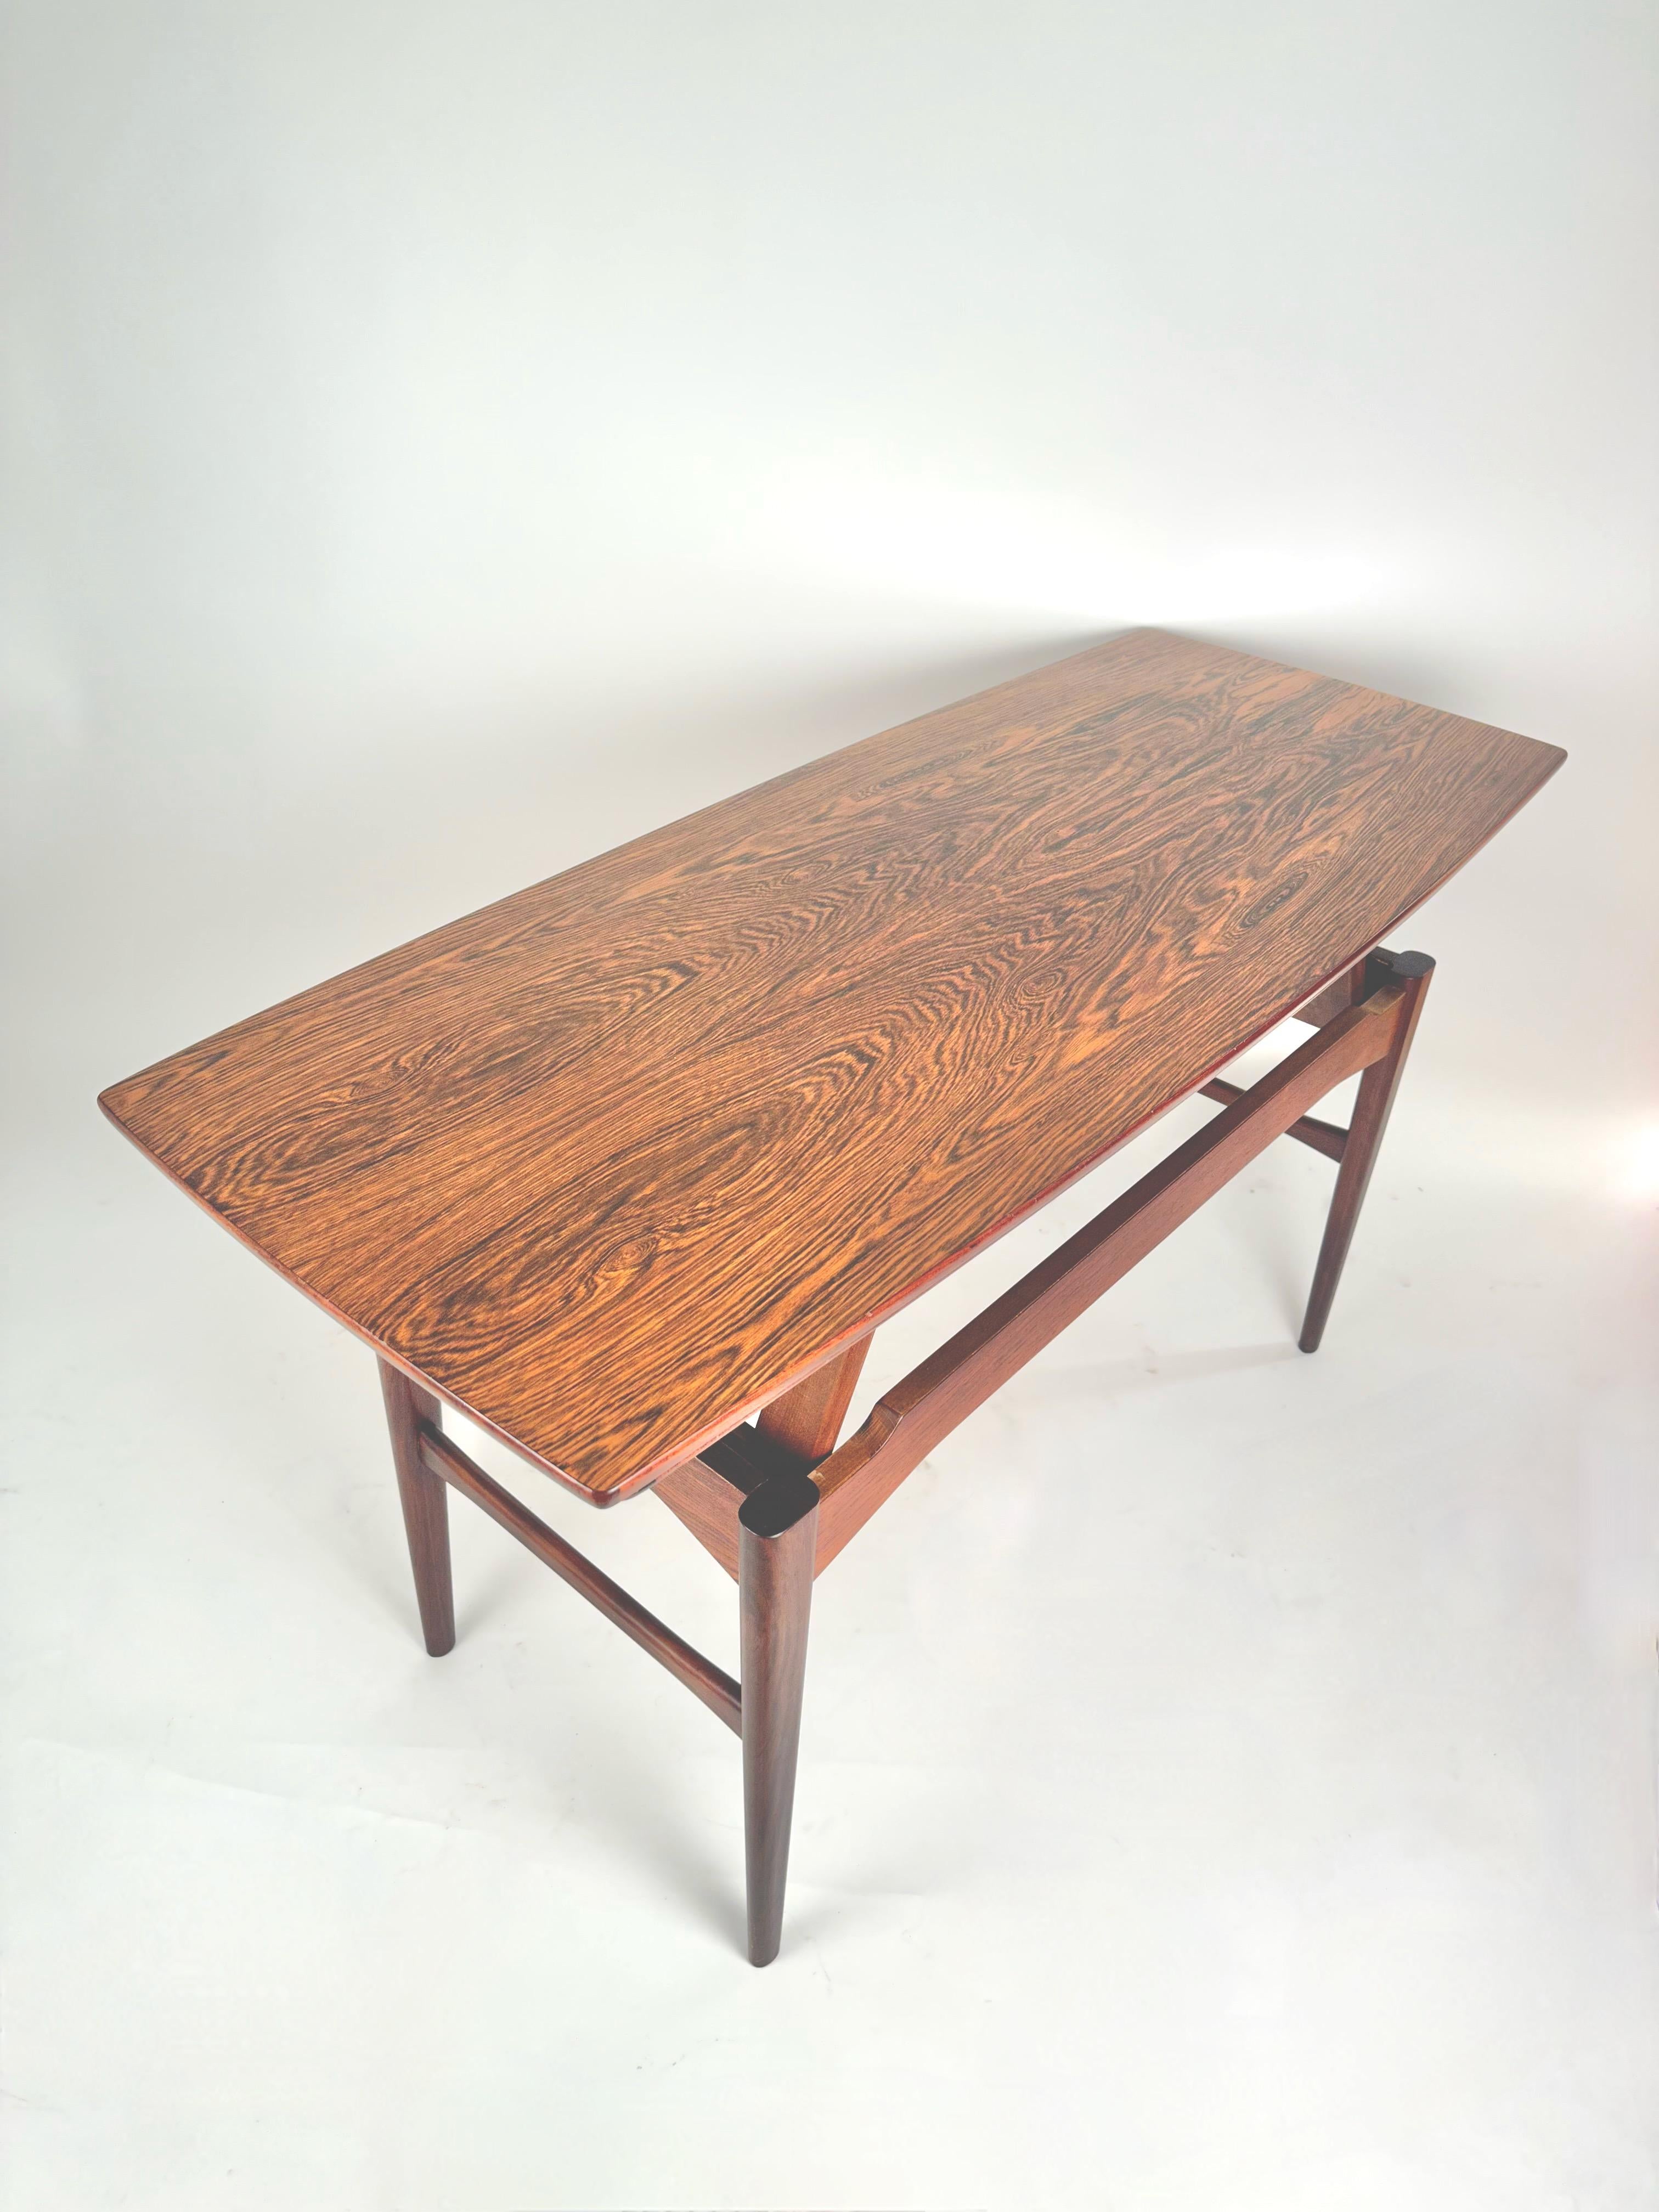 Mid-20th Century Mid-Century Modern Rosewood Console/Coffee Table, Denmark, 1950